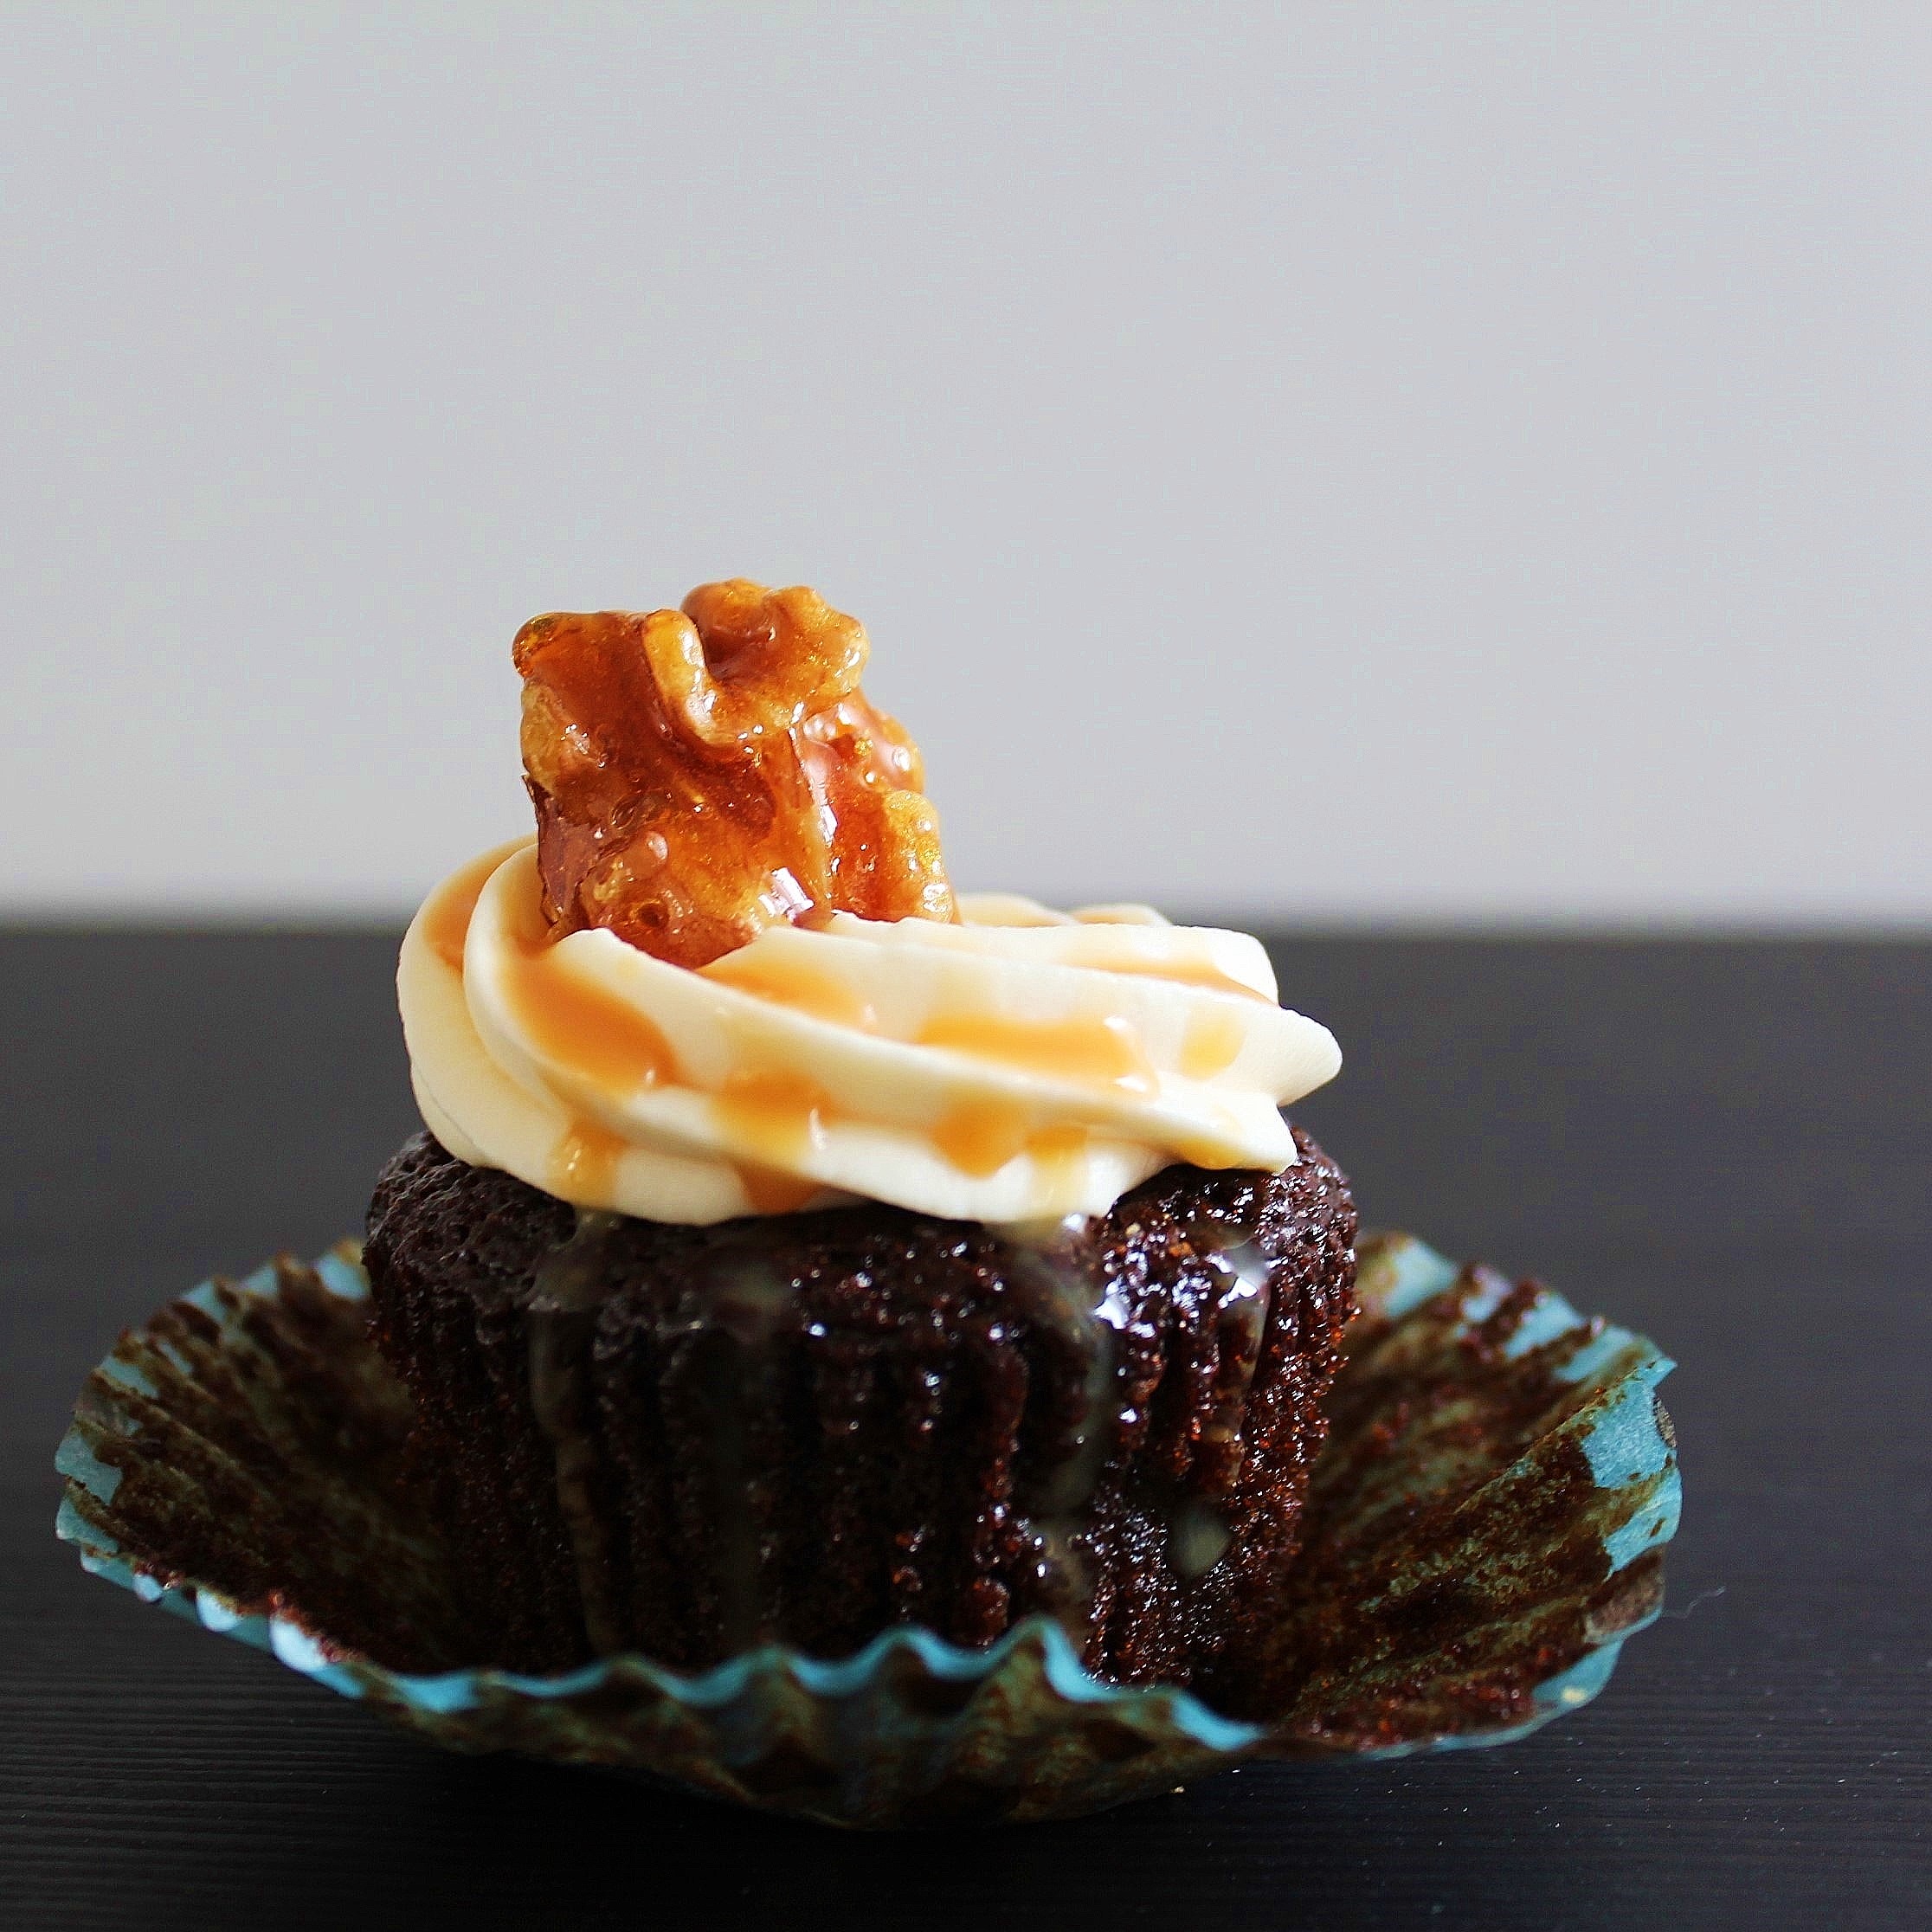 A gingerbread cupcake drizzled with salted caramel